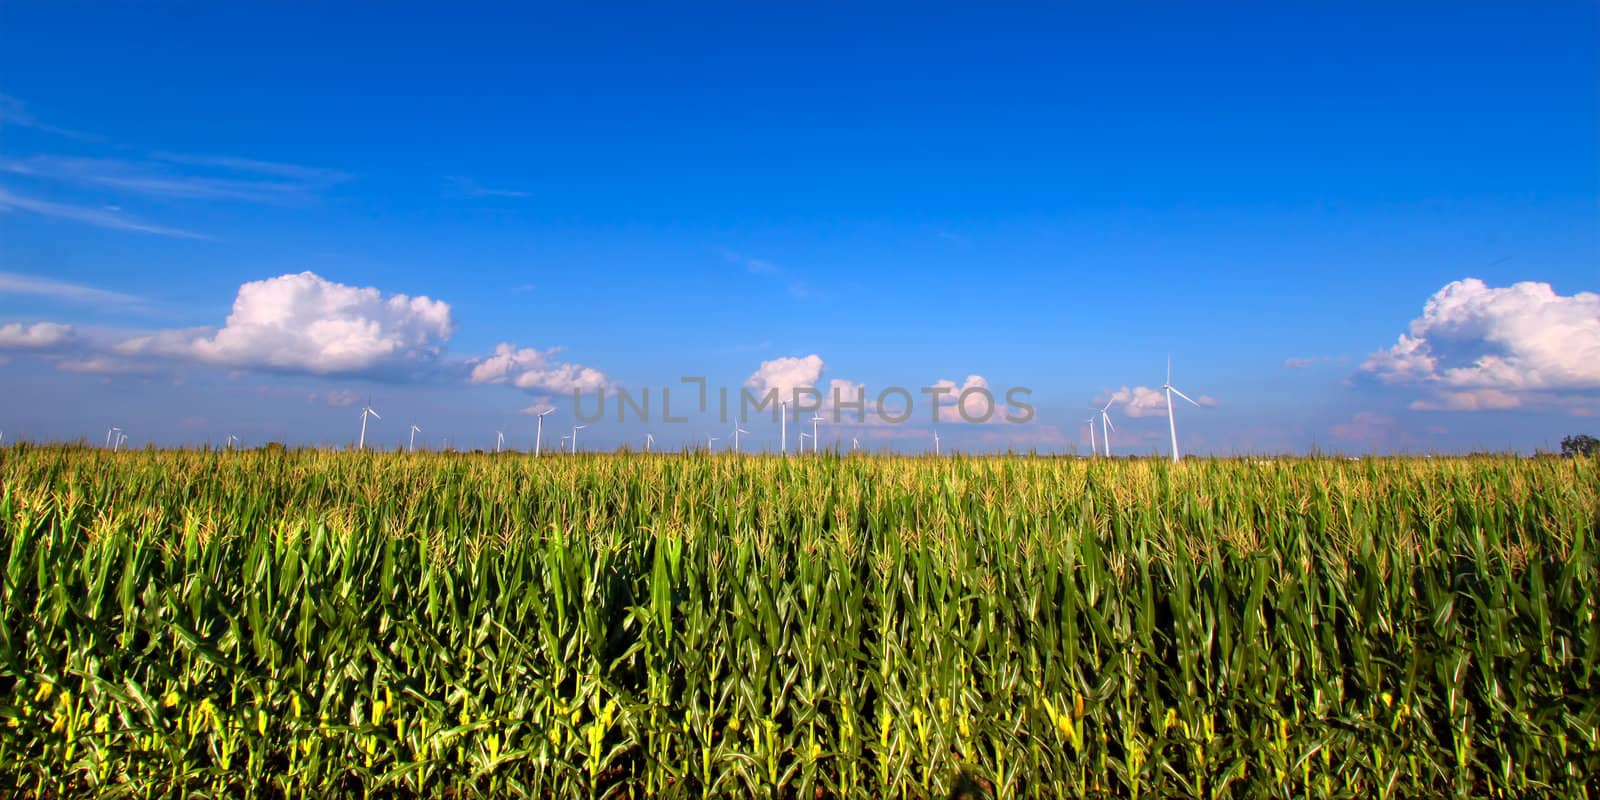 View of an Illinois cornfield on a beautiful sunny day.